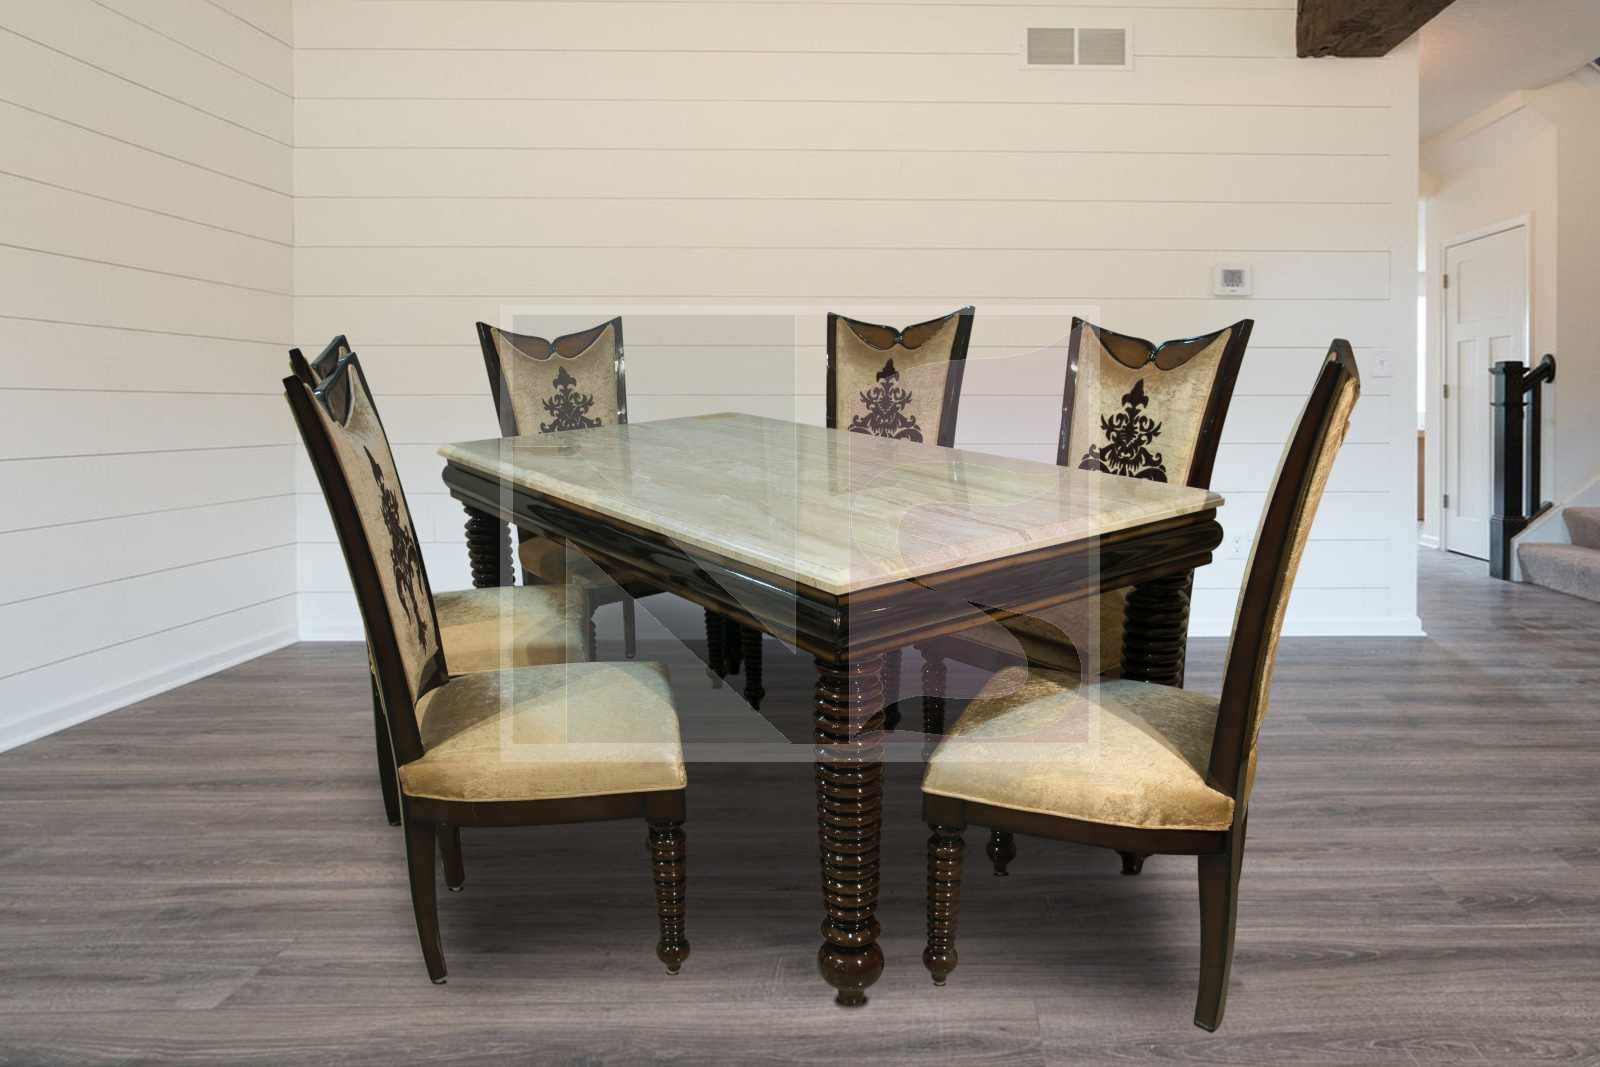 Ring Dinning Table